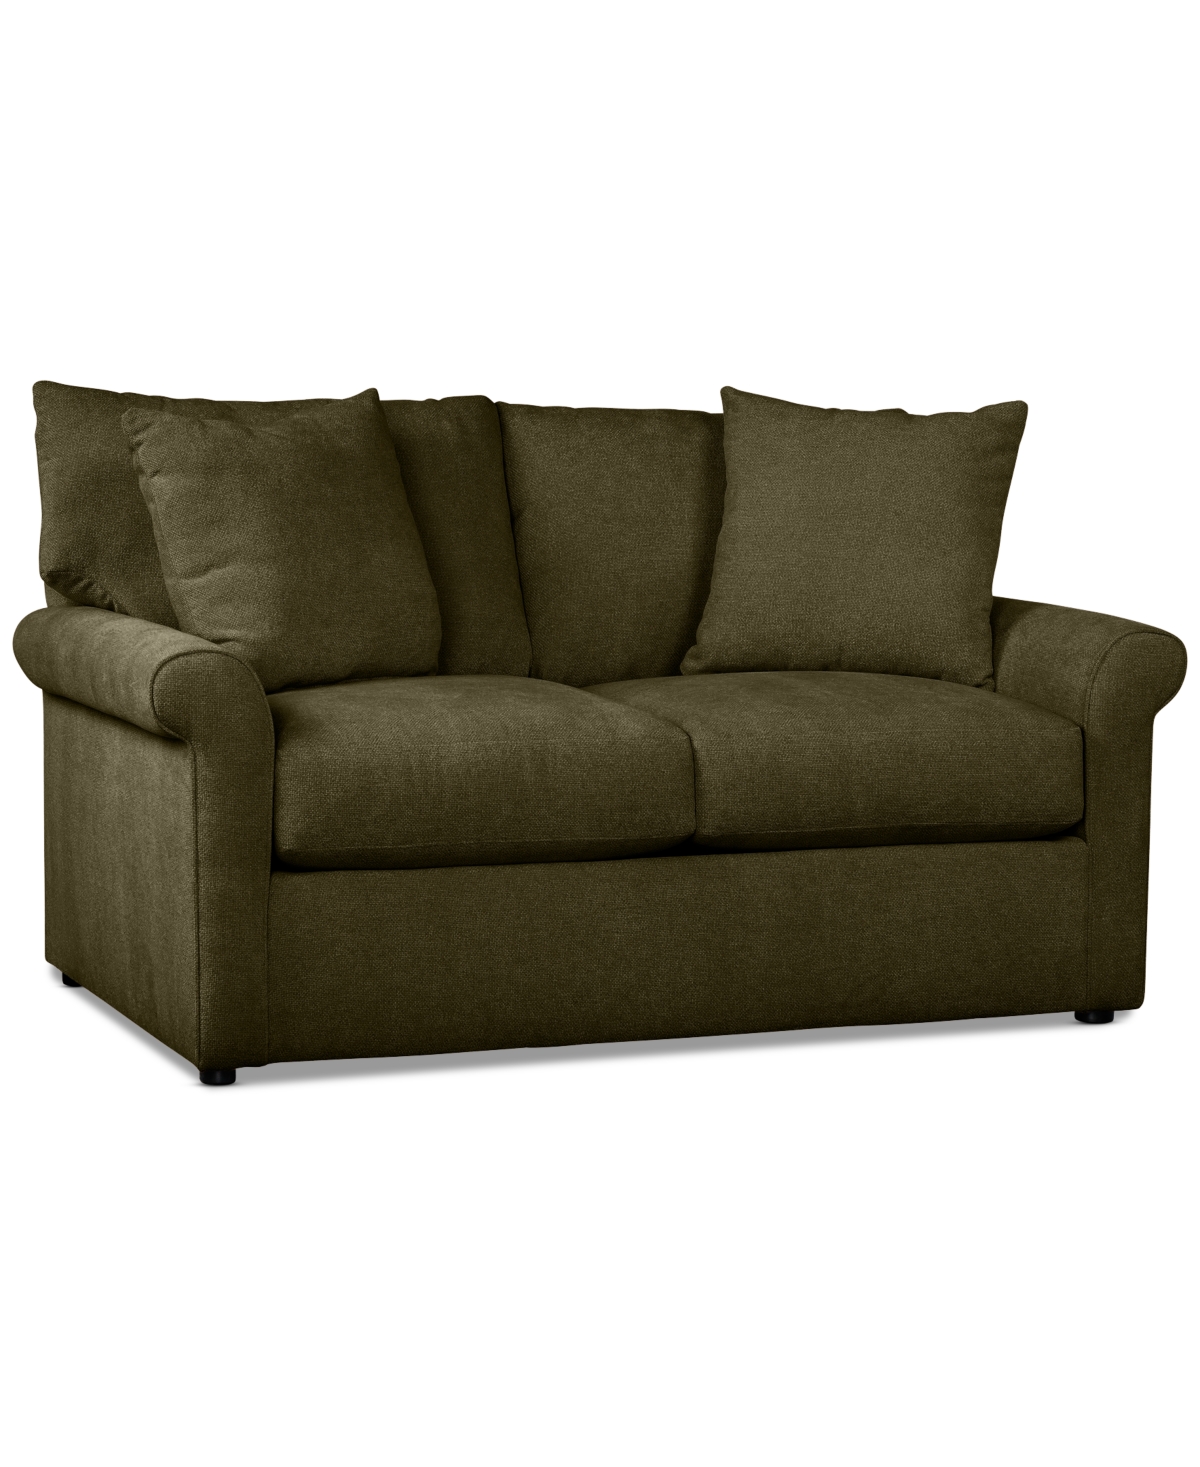 Furniture Wrenley 63" Fabric Loveseat, Created For Macy's In Olive